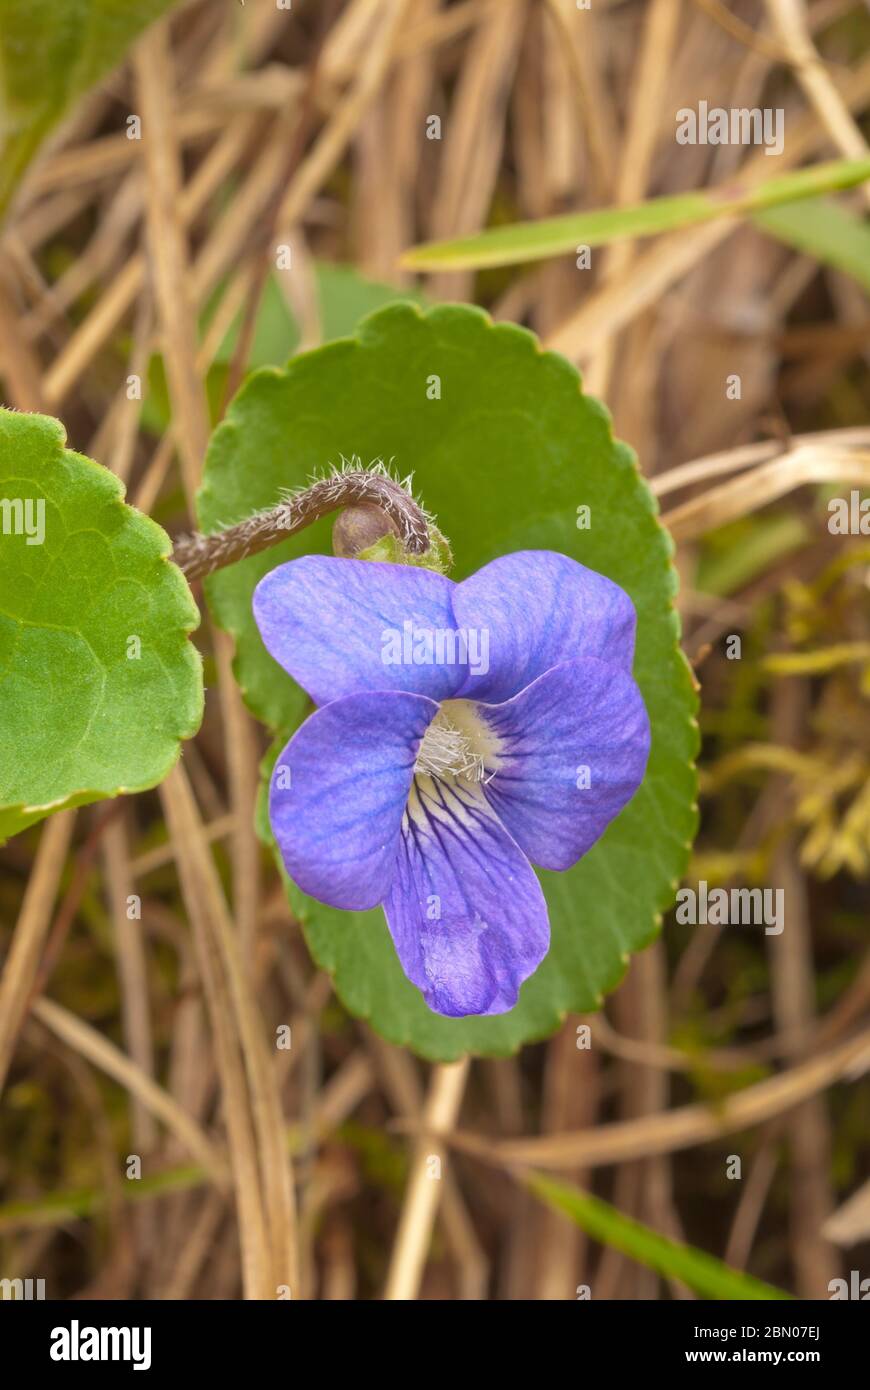 An american dog violet, Viola,conspersa, growing in a woodland area in eastern Ontario, Canada Stock Photo